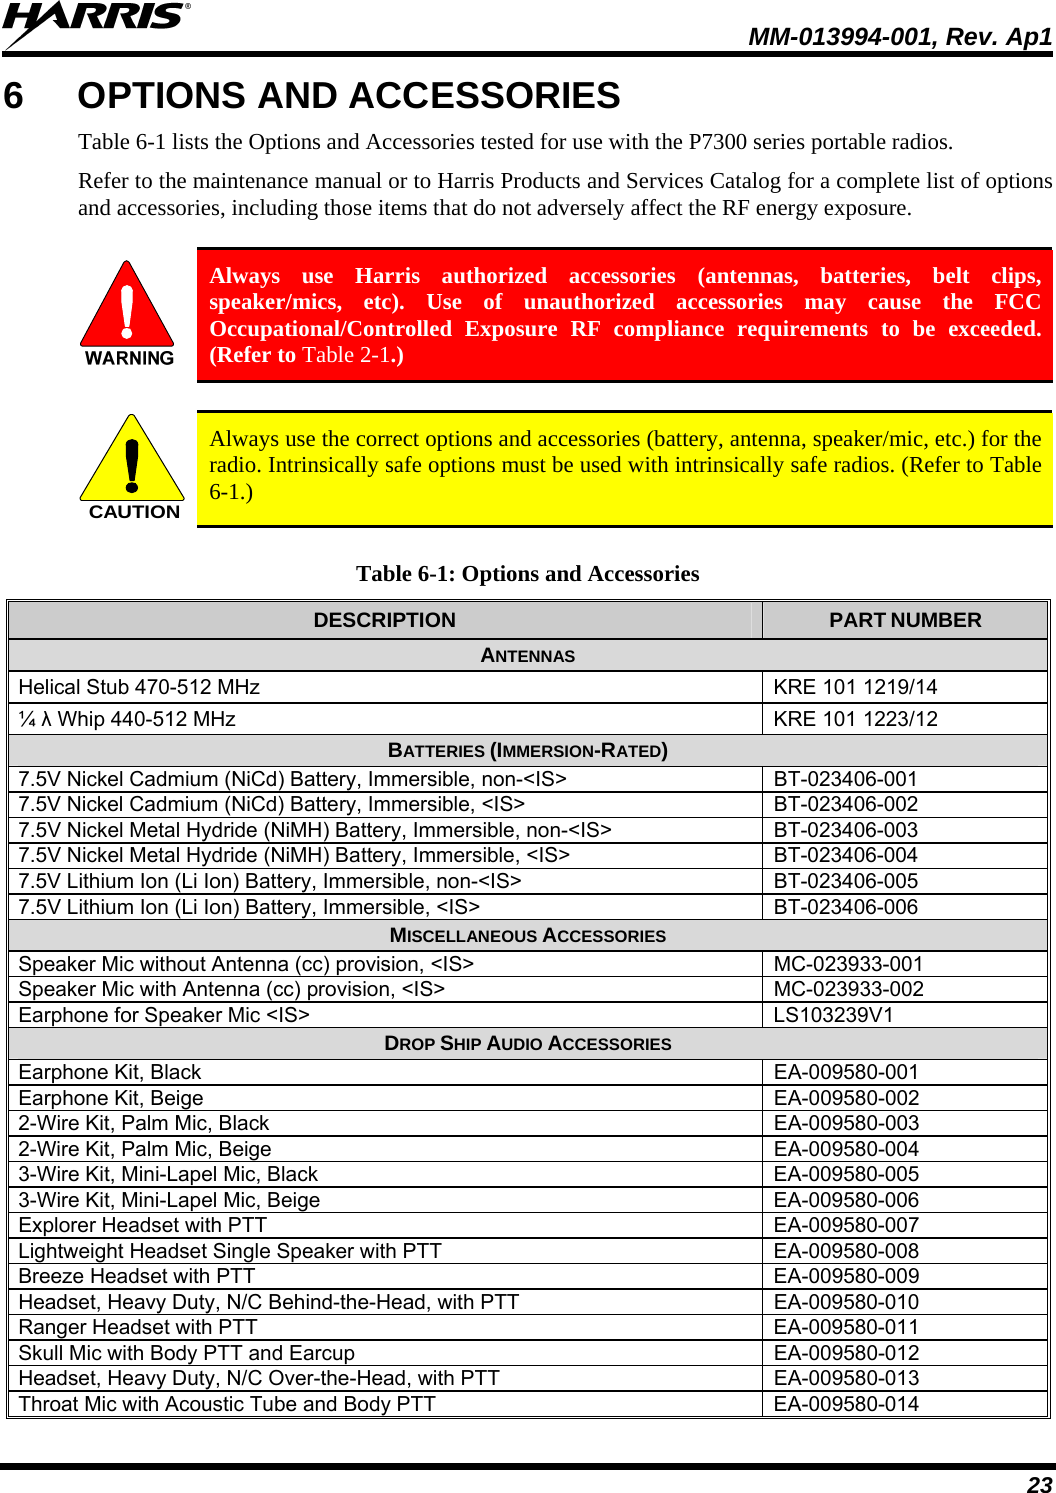  MM-013994-001, Rev. Ap1 23 6  OPTIONS AND ACCESSORIES Table 6-1 lists the Options and Accessories tested for use with the P7300 series portable radios.  Refer to the maintenance manual or to Harris Products and Services Catalog for a complete list of options and accessories, including those items that do not adversely affect the RF energy exposure.   Always use Harris authorized accessories (antennas, batteries, belt clips, speaker/mics, etc). Use of unauthorized accessories may cause the FCC Occupational/Controlled Exposure RF compliance requirements to be exceeded. (Refer to Table 2-1.)  CAUTION Always use the correct options and accessories (battery, antenna, speaker/mic, etc.) for the radio. Intrinsically safe options must be used with intrinsically safe radios. (Refer to Table 6-1.)  Table 6-1: Options and Accessories DESCRIPTION  PART NUMBER ANTENNAS Helical Stub 470-512 MHz  KRE 101 1219/14 ¼ λ Whip 440-512 MHz  KRE 101 1223/12 BATTERIES (IMMERSION-RATED) 7.5V Nickel Cadmium (NiCd) Battery, Immersible, non-&lt;IS&gt;  BT-023406-001 7.5V Nickel Cadmium (NiCd) Battery, Immersible, &lt;IS&gt;  BT-023406-002 7.5V Nickel Metal Hydride (NiMH) Battery, Immersible, non-&lt;IS&gt;  BT-023406-003 7.5V Nickel Metal Hydride (NiMH) Battery, Immersible, &lt;IS&gt;  BT-023406-004 7.5V Lithium Ion (Li Ion) Battery, Immersible, non-&lt;IS&gt;  BT-023406-005 7.5V Lithium Ion (Li Ion) Battery, Immersible, &lt;IS&gt;  BT-023406-006 MISCELLANEOUS ACCESSORIES Speaker Mic without Antenna (cc) provision, &lt;IS&gt;  MC-023933-001 Speaker Mic with Antenna (cc) provision, &lt;IS&gt;  MC-023933-002 Earphone for Speaker Mic &lt;IS&gt;  LS103239V1 DROP SHIP AUDIO ACCESSORIES Earphone Kit, Black  EA-009580-001 Earphone Kit, Beige  EA-009580-002 2-Wire Kit, Palm Mic, Black  EA-009580-003 2-Wire Kit, Palm Mic, Beige  EA-009580-004 3-Wire Kit, Mini-Lapel Mic, Black  EA-009580-005 3-Wire Kit, Mini-Lapel Mic, Beige  EA-009580-006 Explorer Headset with PTT  EA-009580-007 Lightweight Headset Single Speaker with PTT  EA-009580-008 Breeze Headset with PTT  EA-009580-009 Headset, Heavy Duty, N/C Behind-the-Head, with PTT  EA-009580-010 Ranger Headset with PTT  EA-009580-011 Skull Mic with Body PTT and Earcup  EA-009580-012 Headset, Heavy Duty, N/C Over-the-Head, with PTT  EA-009580-013 Throat Mic with Acoustic Tube and Body PTT  EA-009580-014 